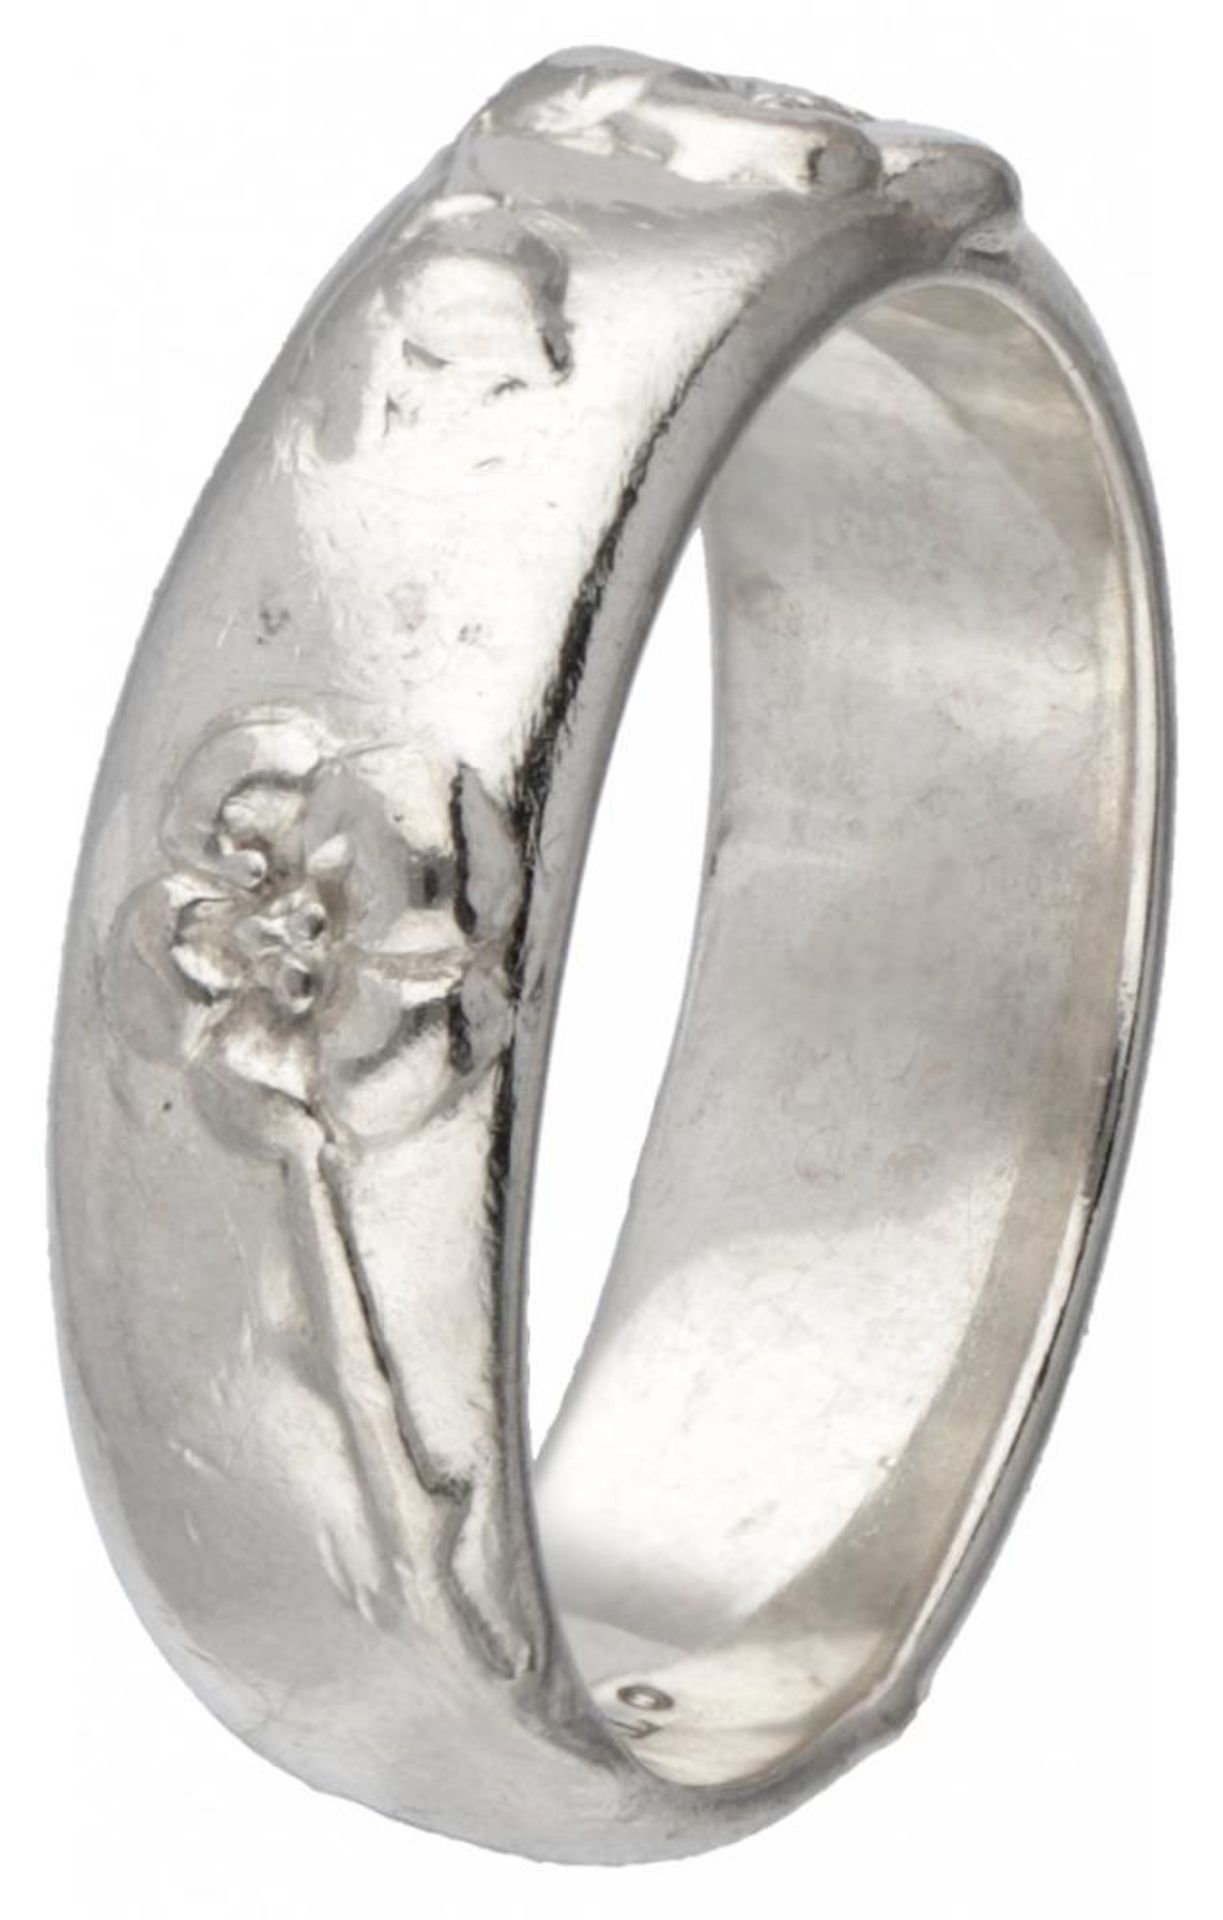 Silver Tiffany & Co. ring with flowers - 925/1000. - Image 2 of 3